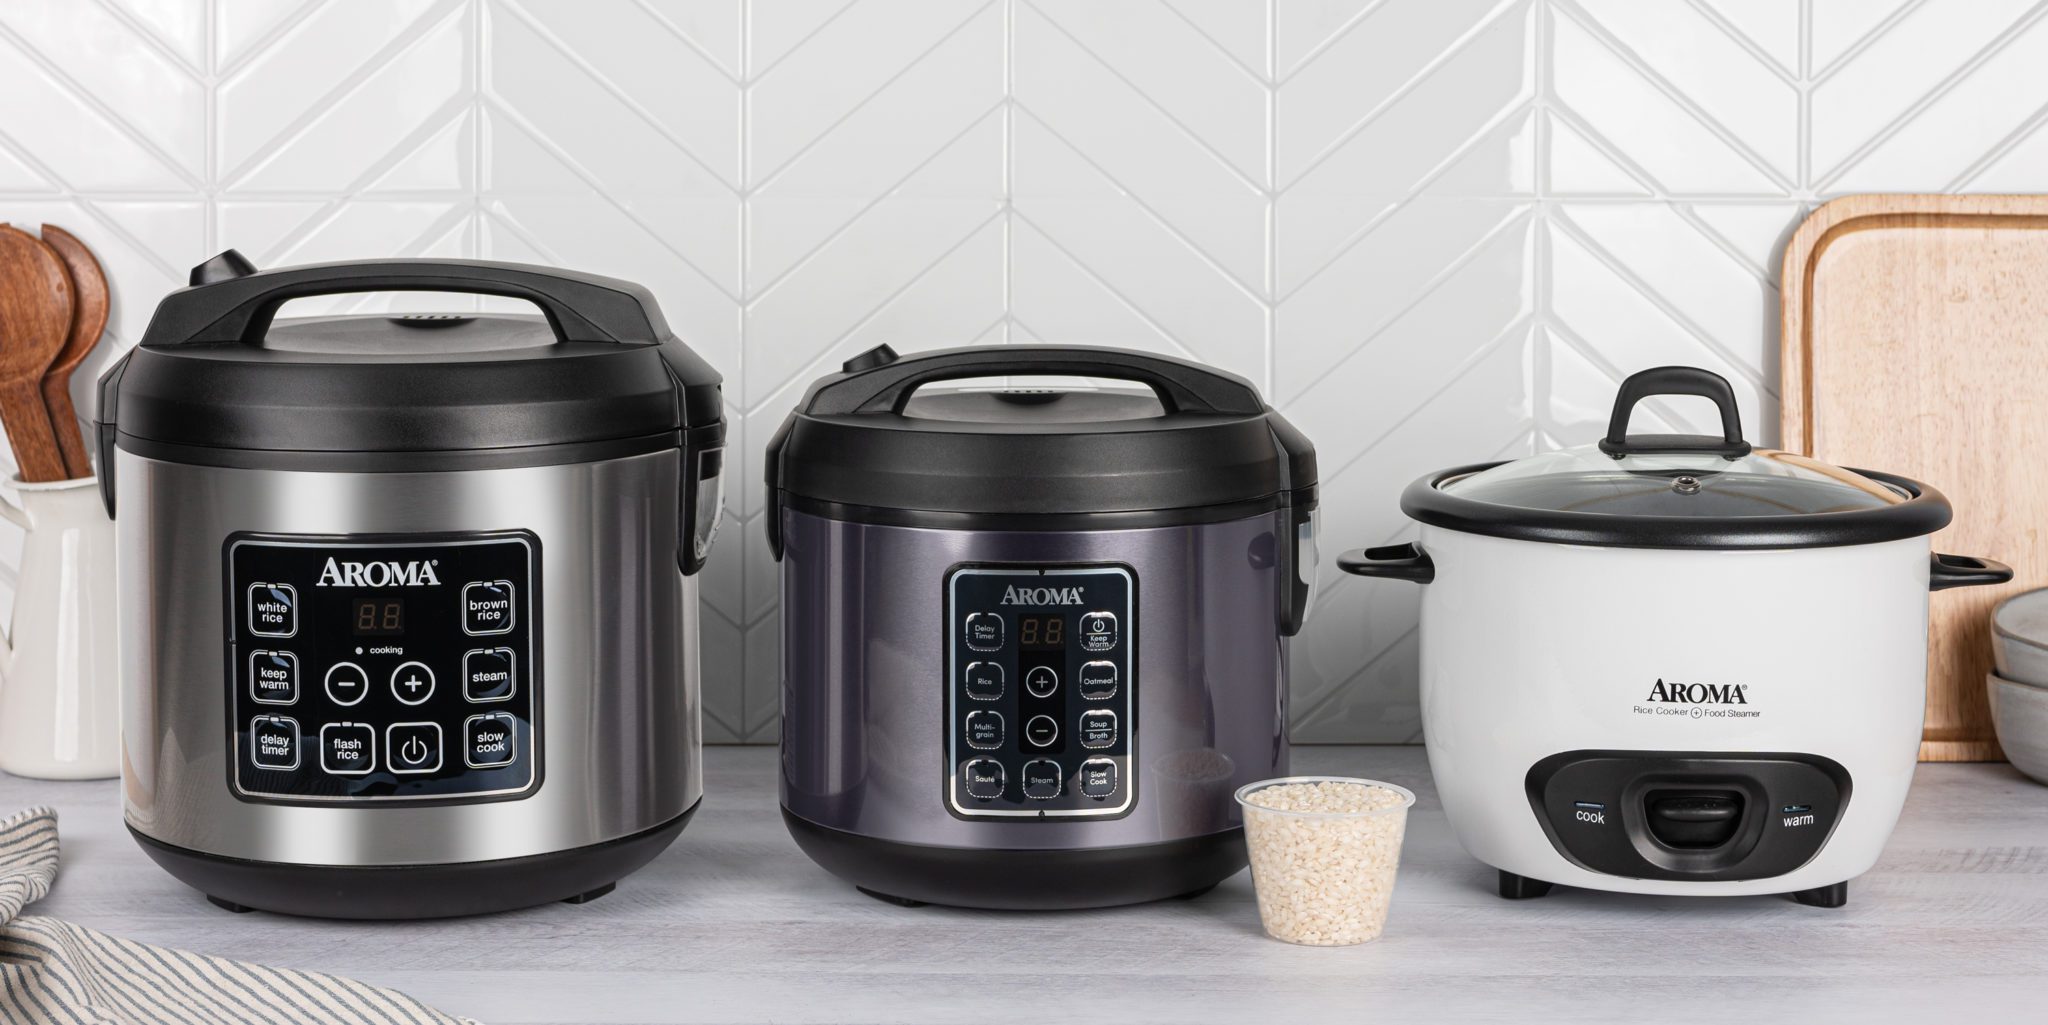 Make Rice Using a Pressure Cooker!!!